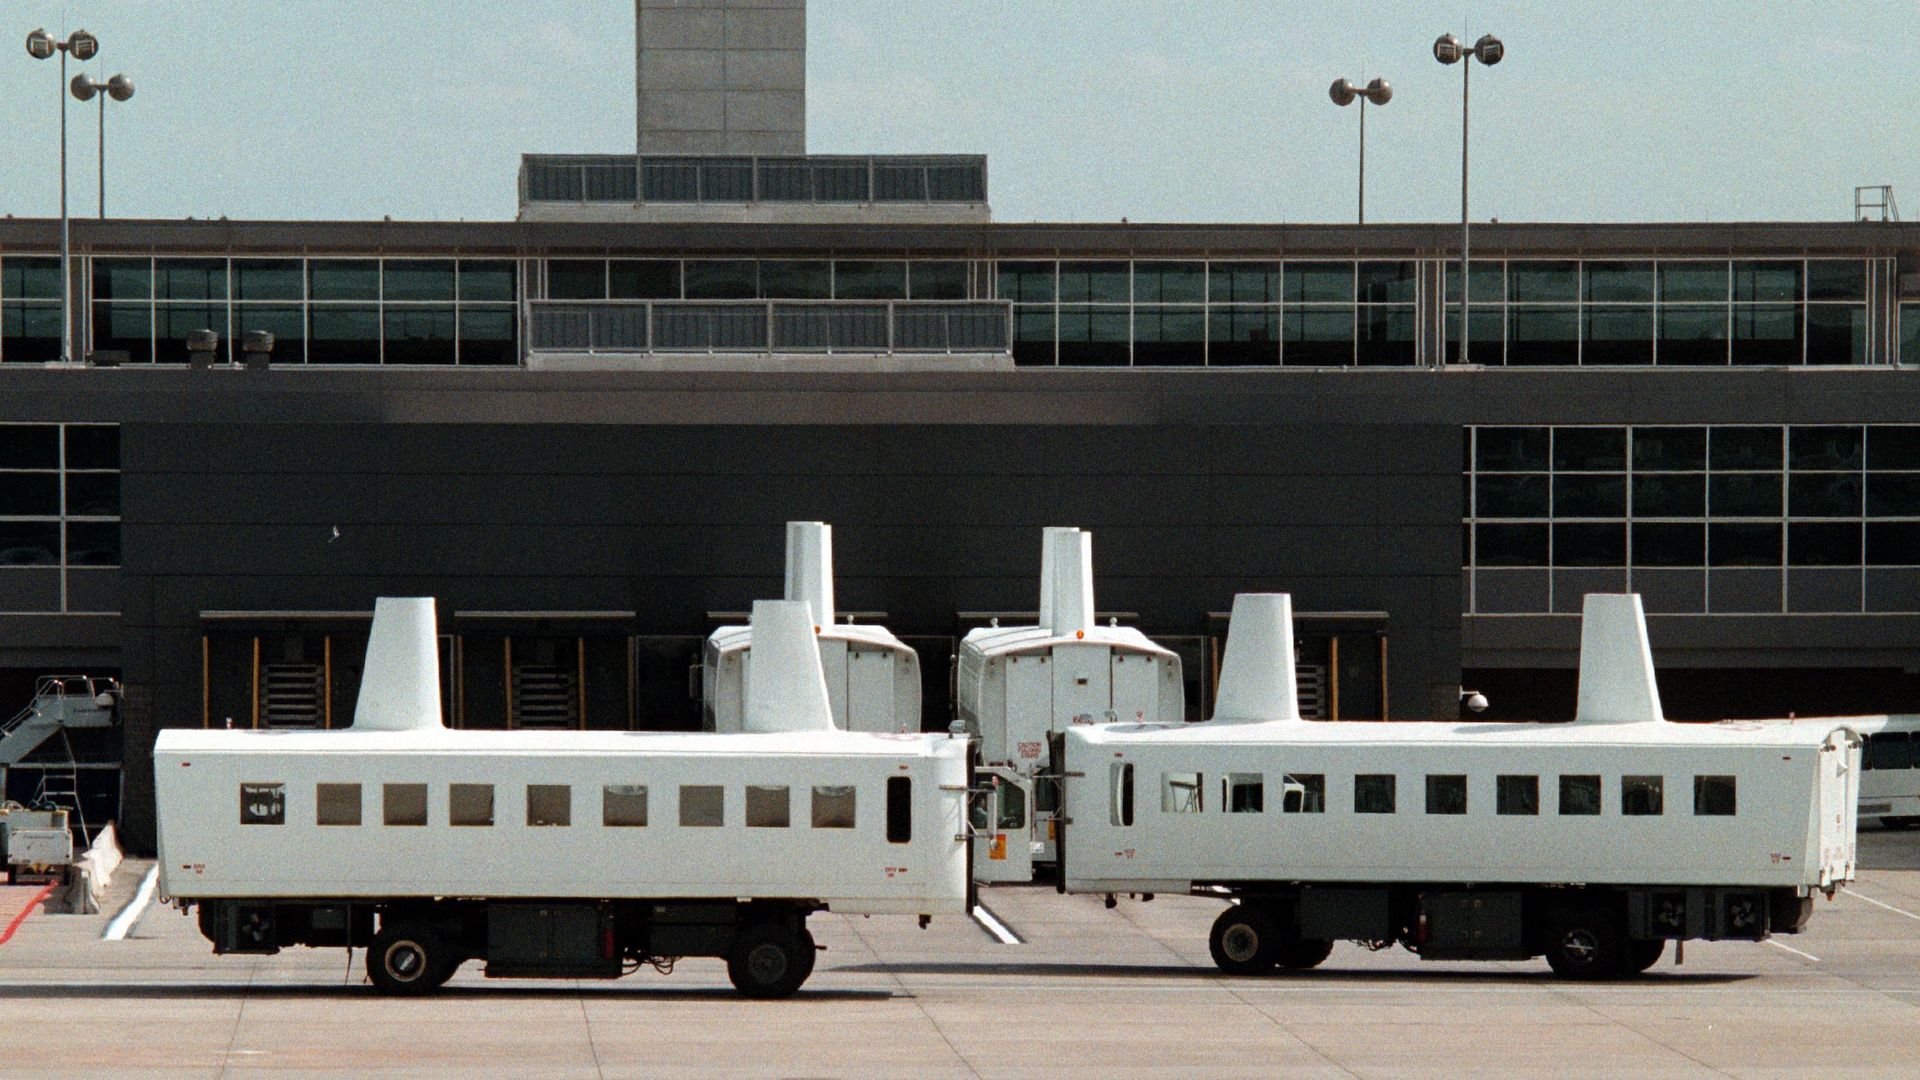 An exterior view of the "people mover" mobile lounges at Dulles Airport